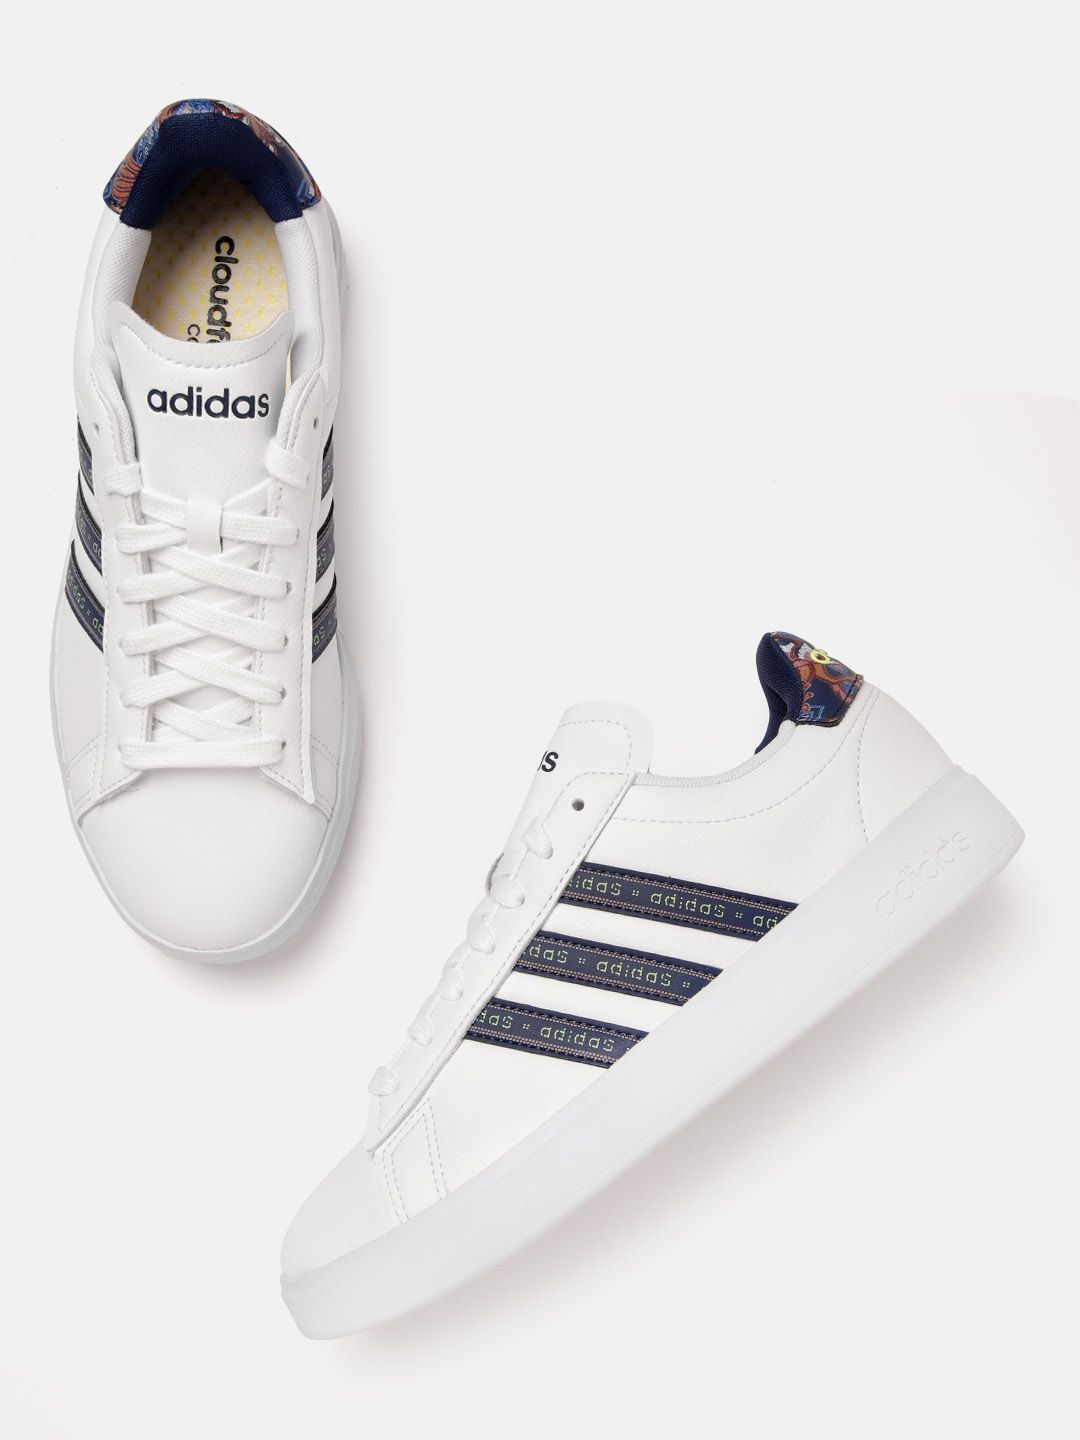 ADIDAS Women White & Navy Blue Solid Grand Court 2.0 Tennis Shoes Price in India